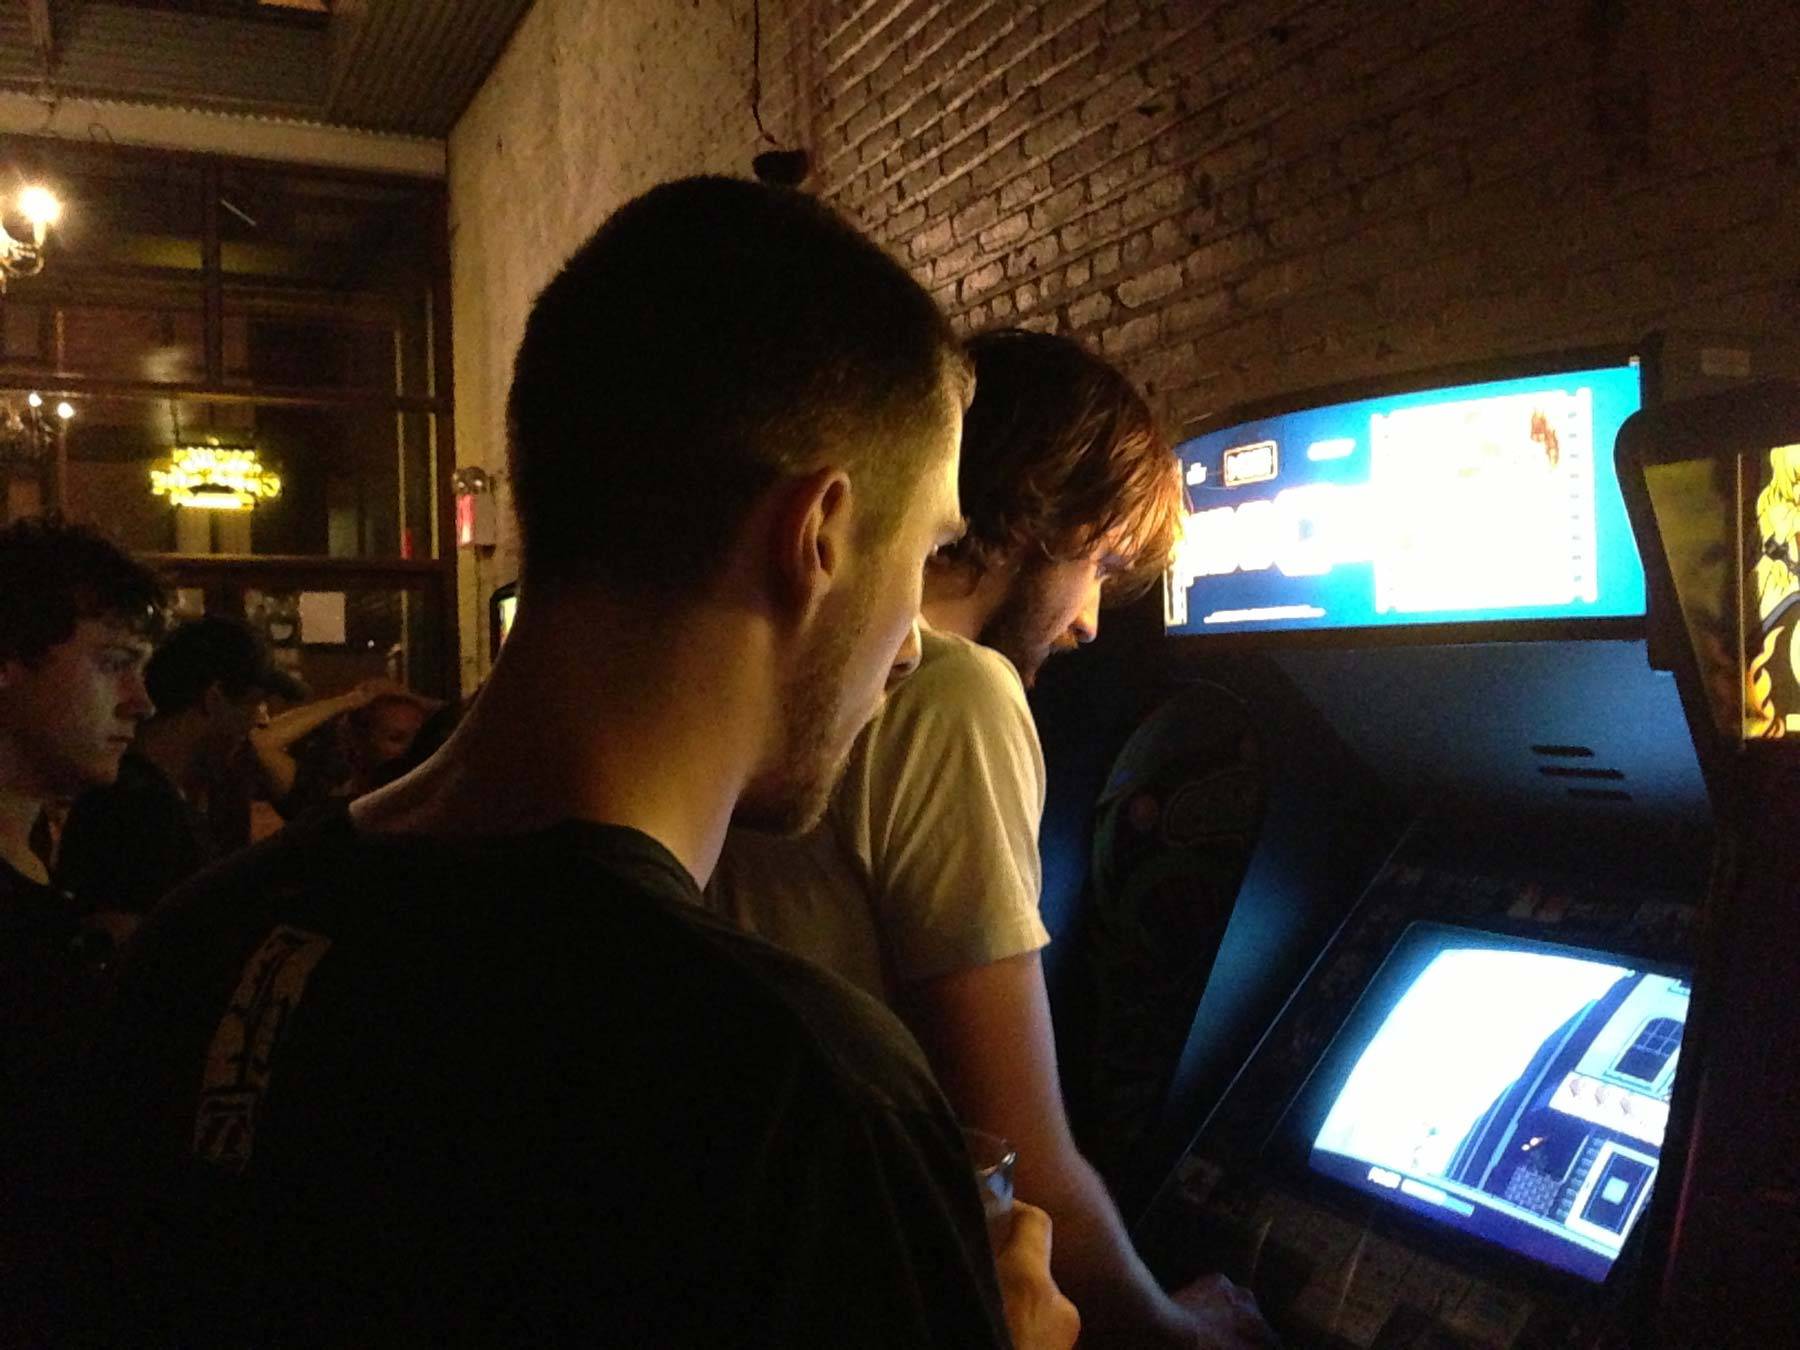 Irwin and Richard watching Butcher play an arcade game